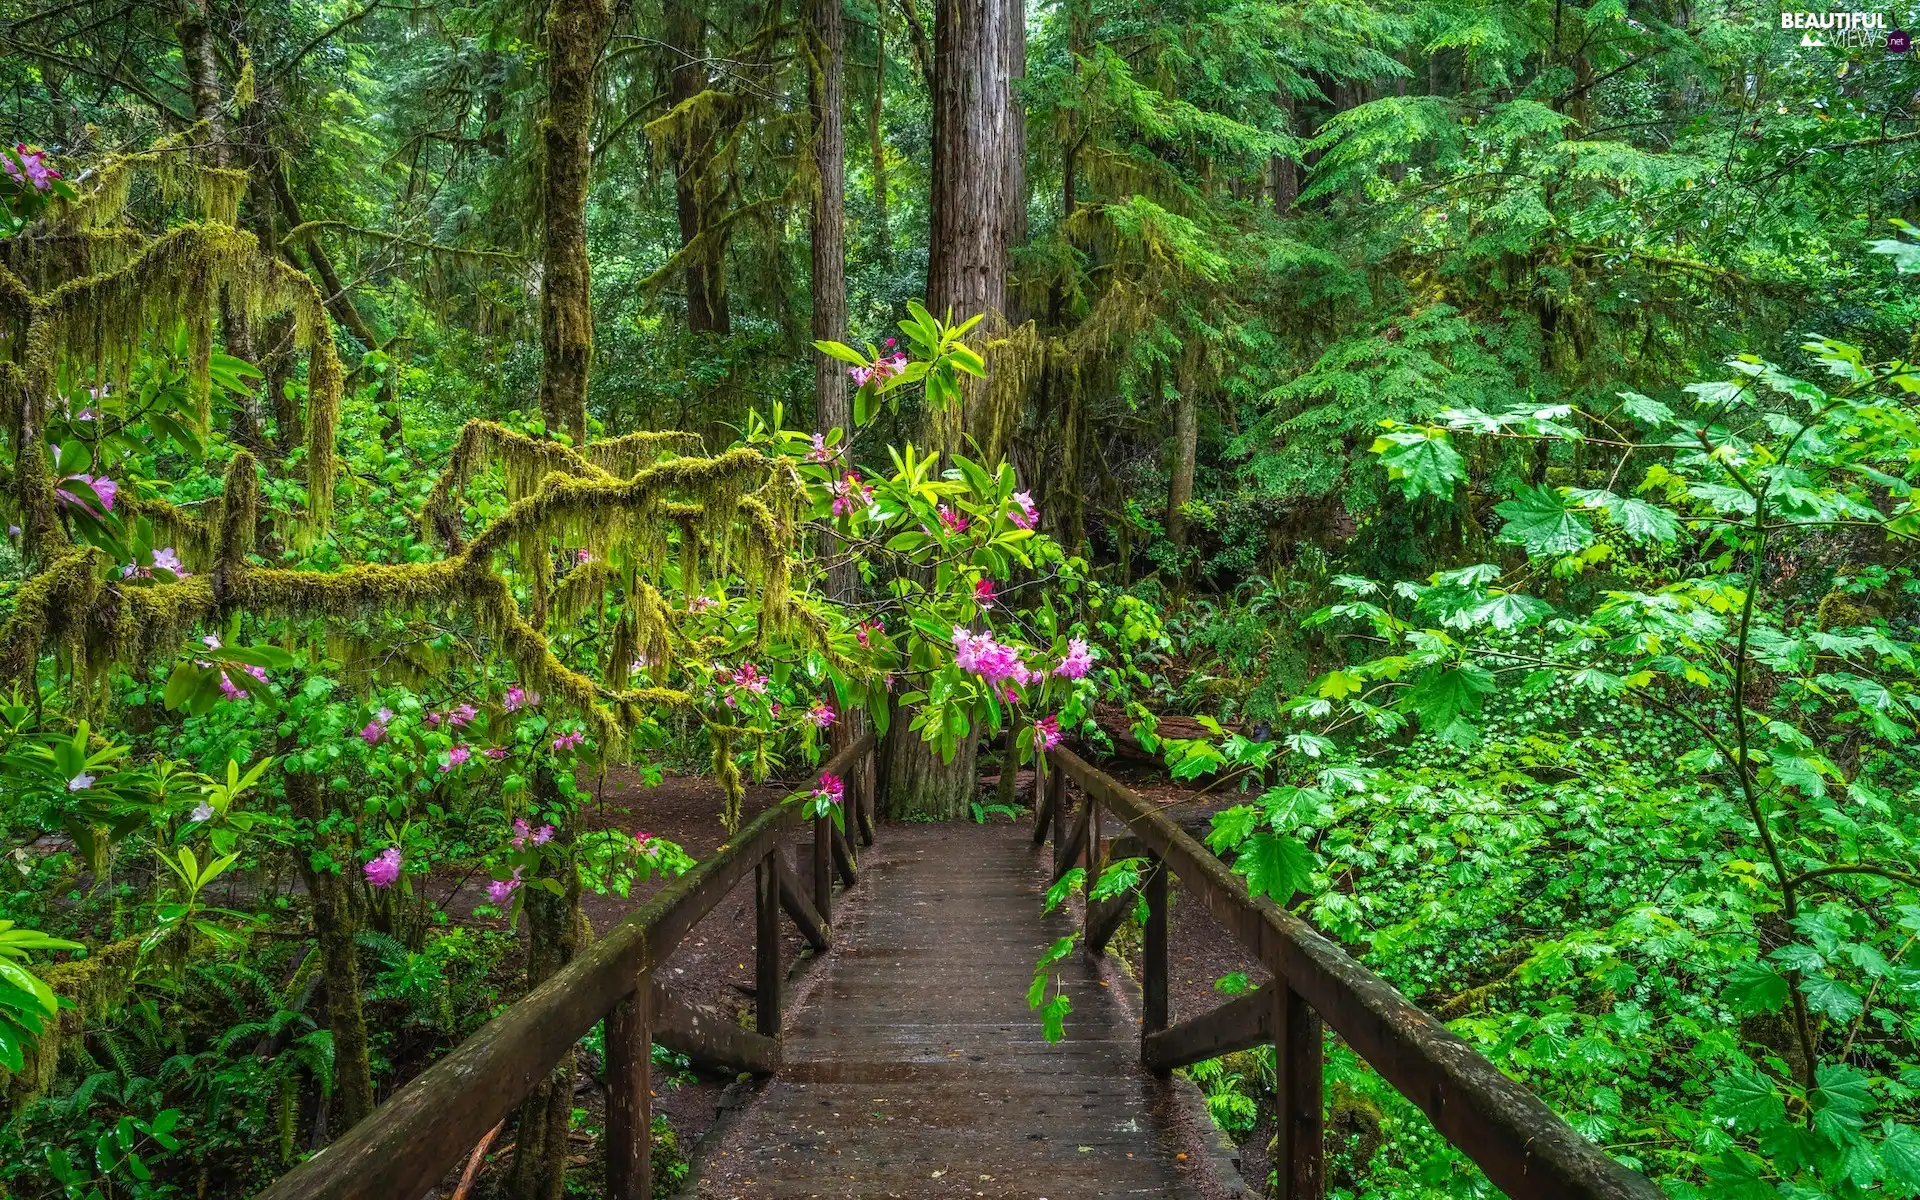 trees, The United States, forest, viewes, rhododendron, Climbers, bridge, Redwood National Park, California, wooden, redwoods